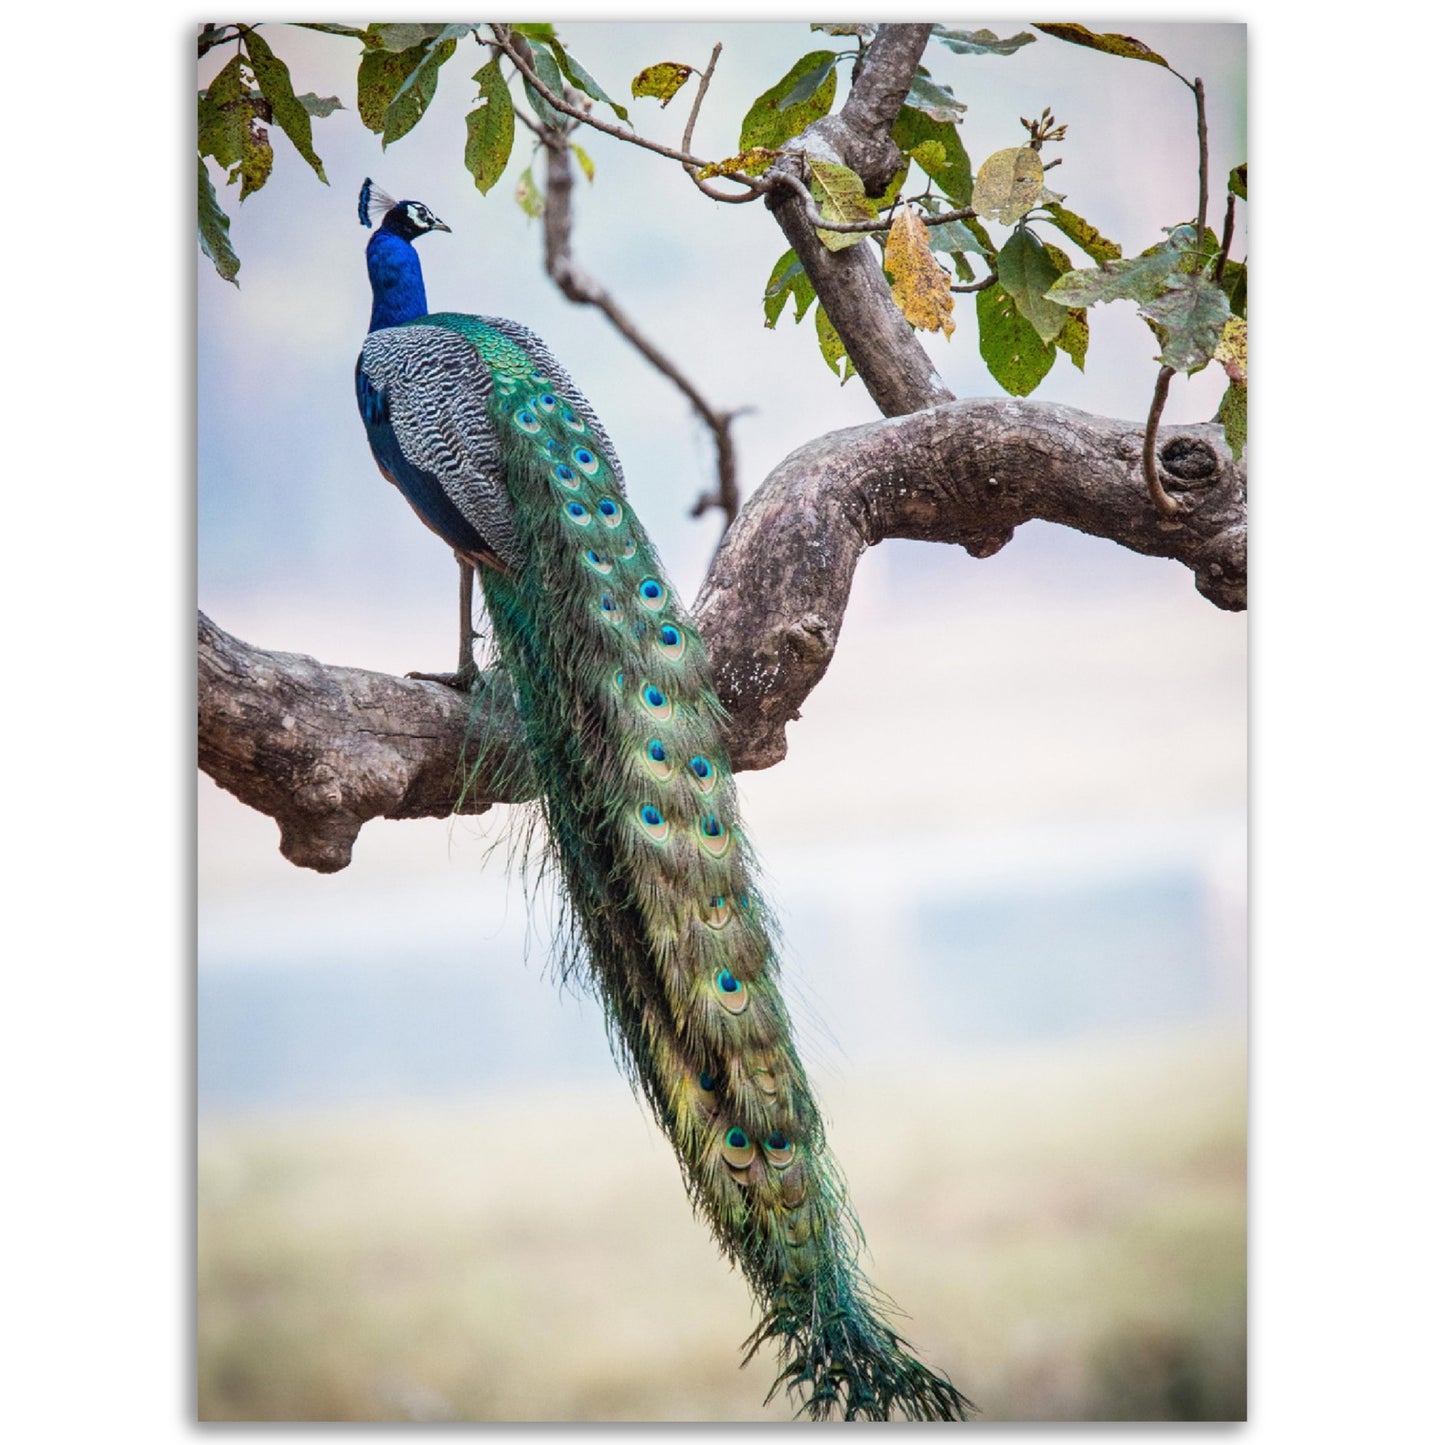 Peacock in a Tree Print